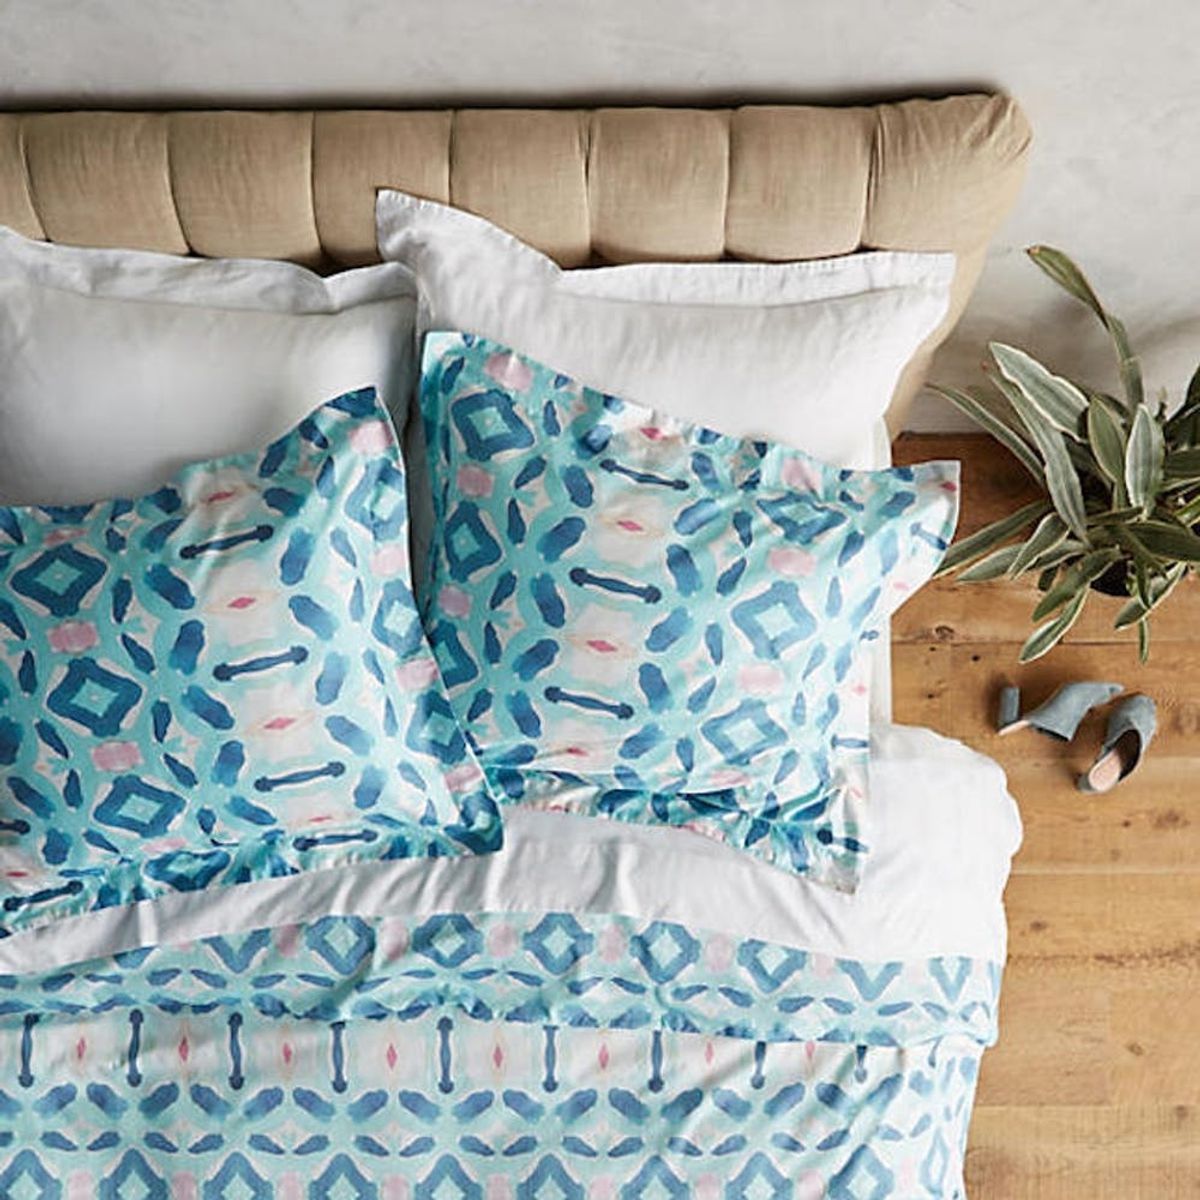 The Top 25 Anthropologie Goodies We Want for Our Bedroom This Spring